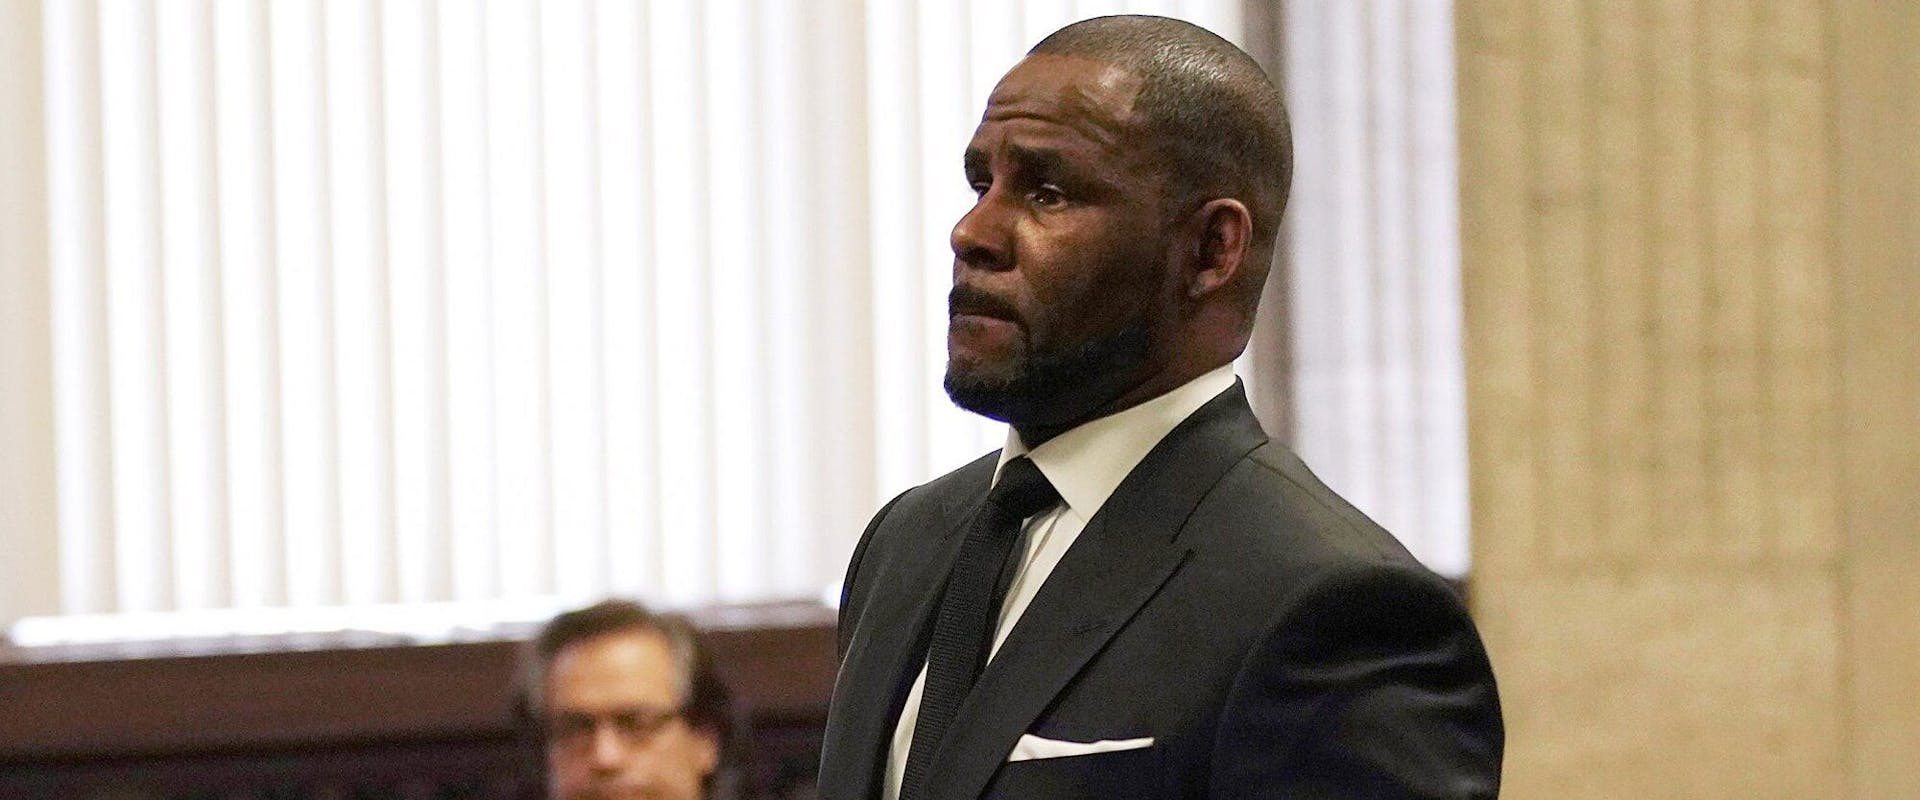 R. Kelly during trial